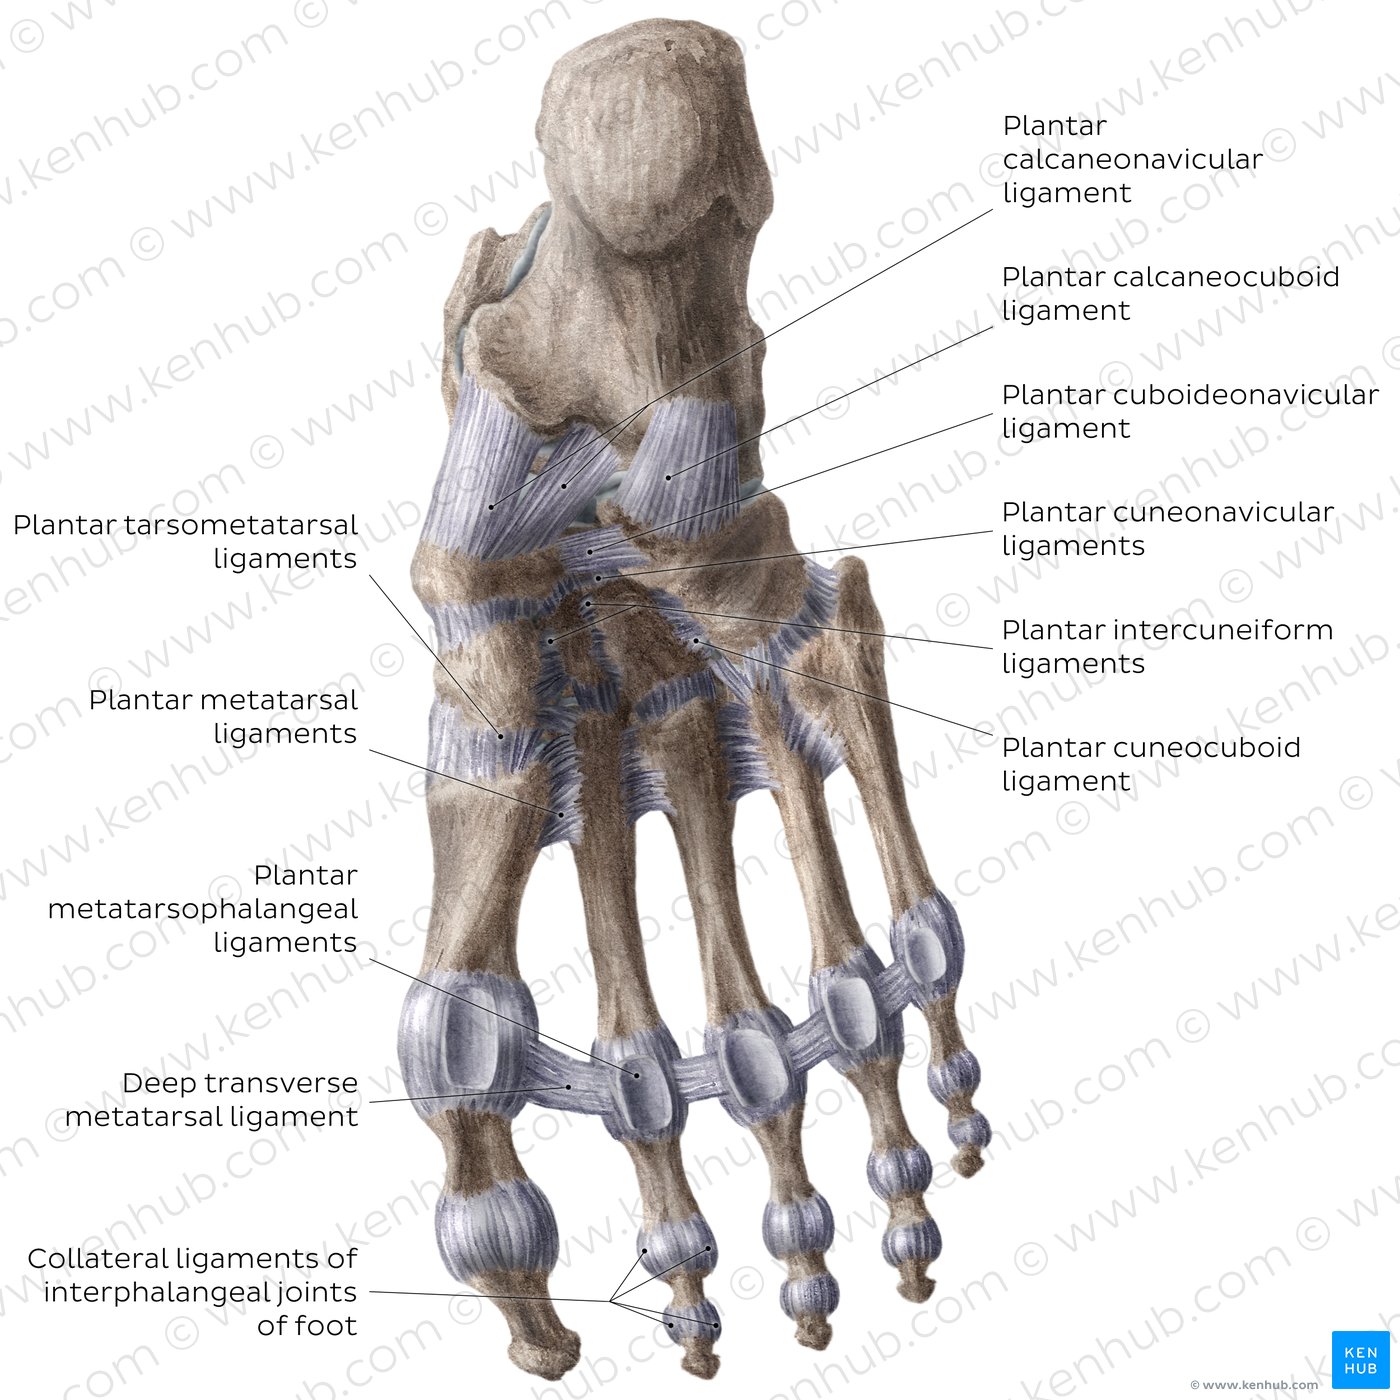 Ligaments of the foot (plantar view)